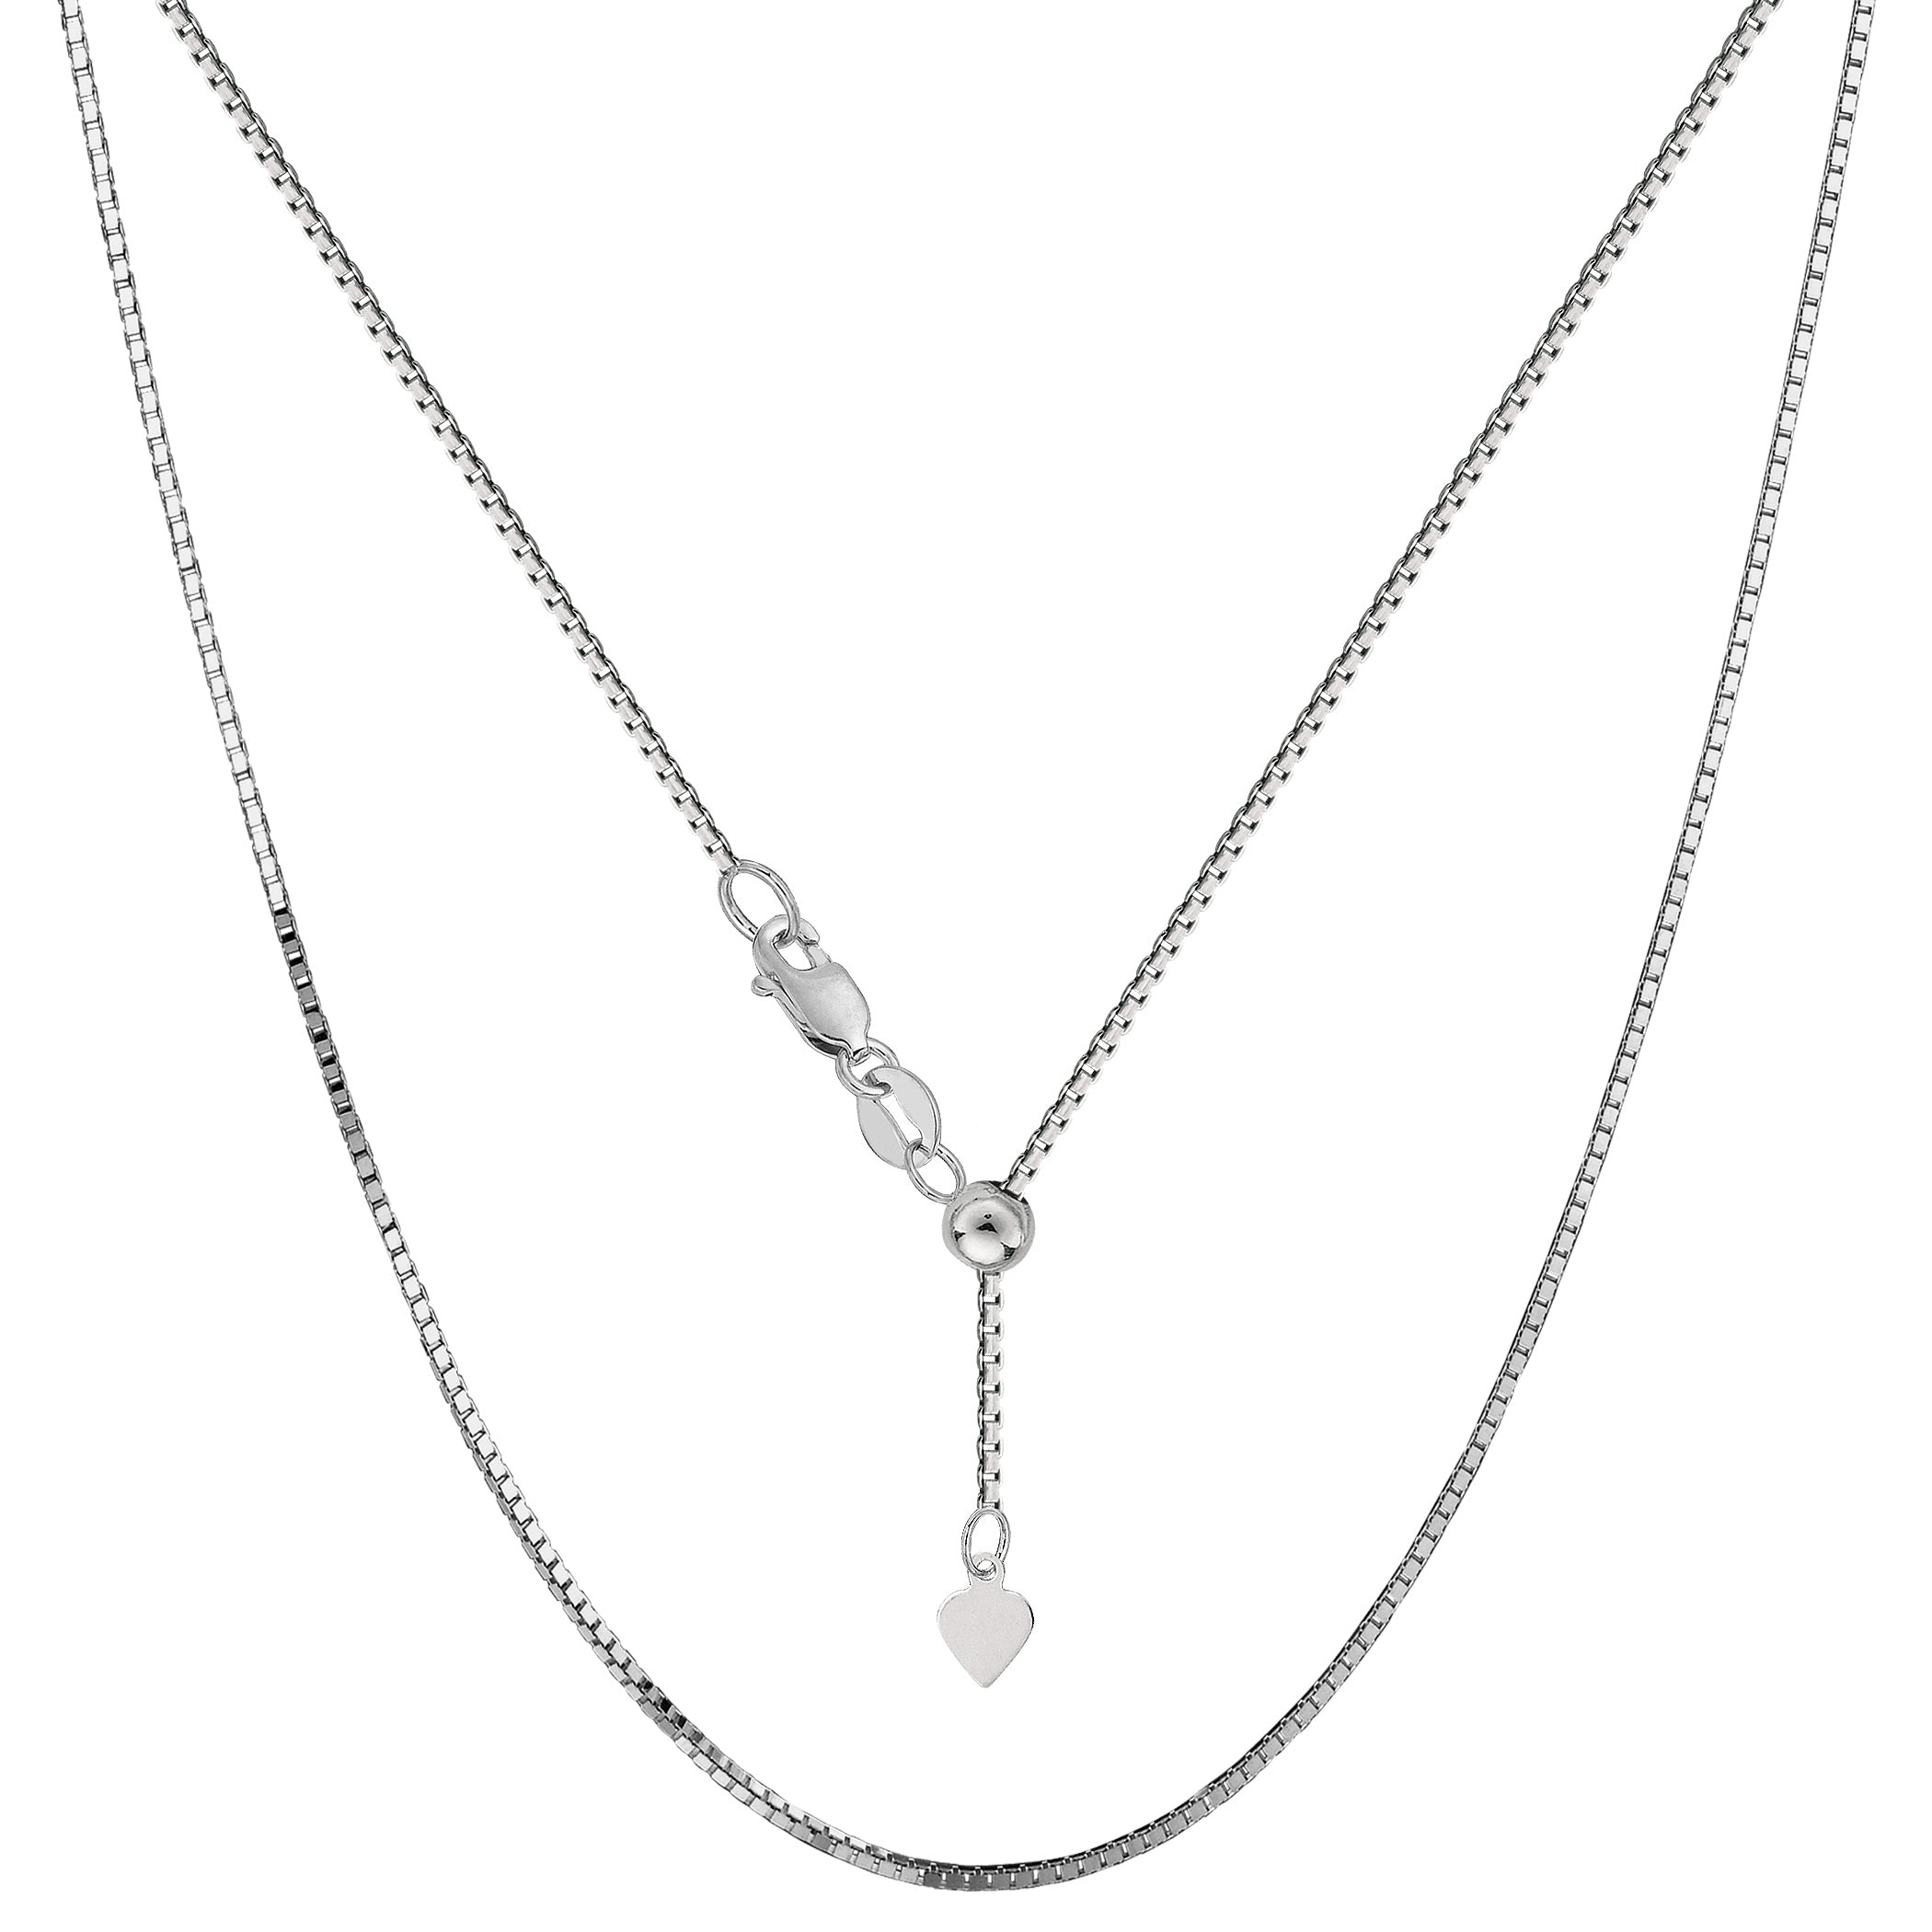 14k White Gold Adjustable Box Link Chain Necklace, 0.85mm, 22" fine designer jewelry for men and women